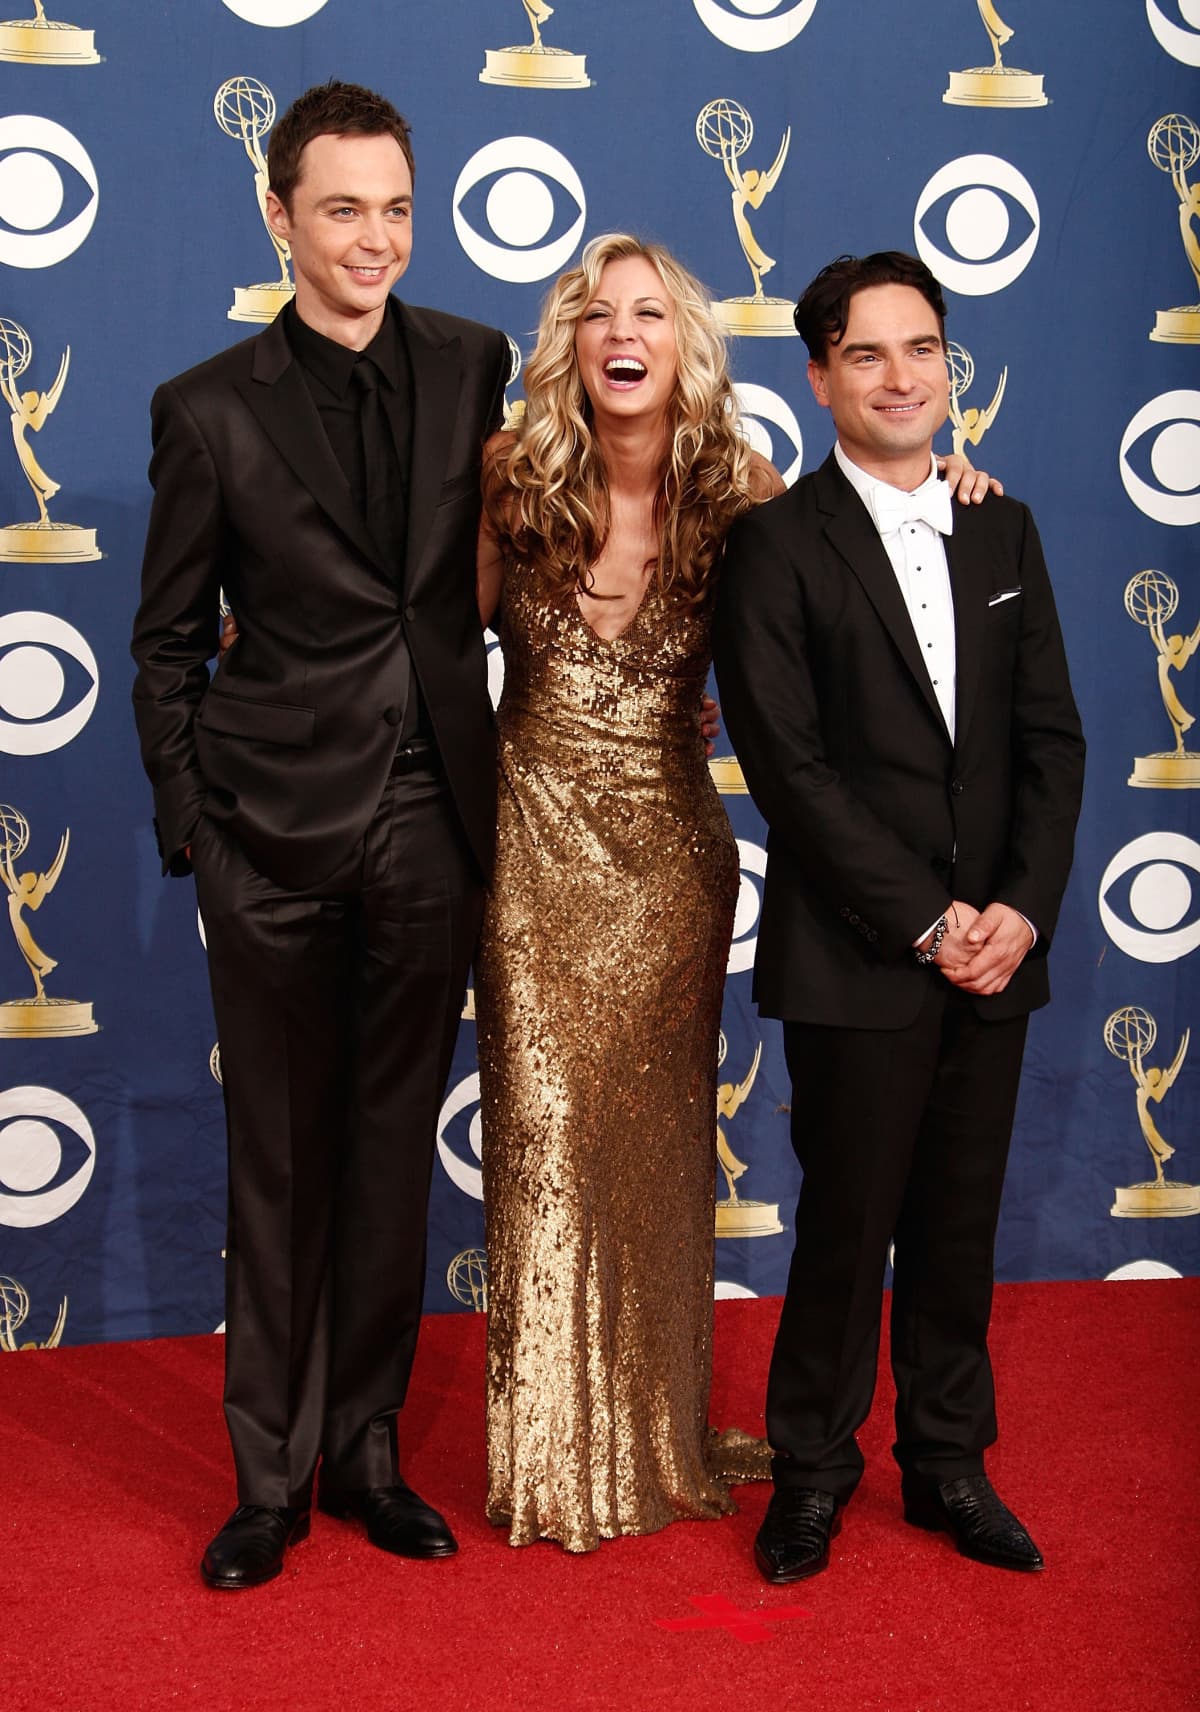 Actors Jim Parsons, Kaley Cuoco, and Johnny Galecki pose in the press room at the 61st Primetime Emmy Awards held at the Nokia Theatre on September 20, 2009 in Los Angeles, California. (Photo by Steve Granitz/WireImage)